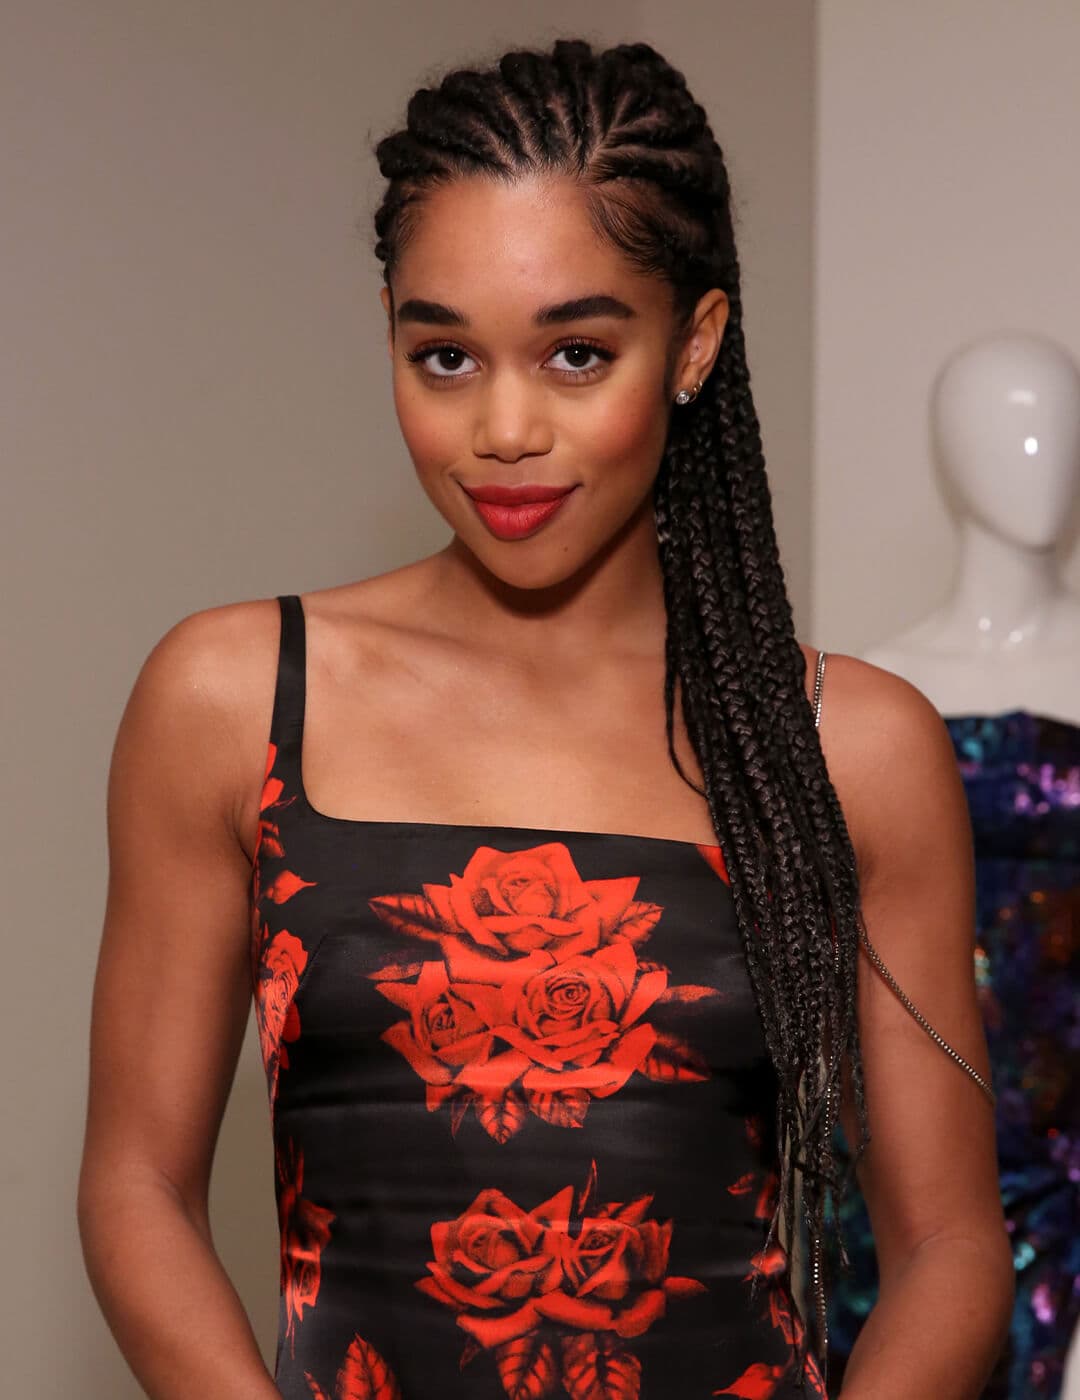 Laura Harrier looking chick in a black and red rose dress and braided hairstyle